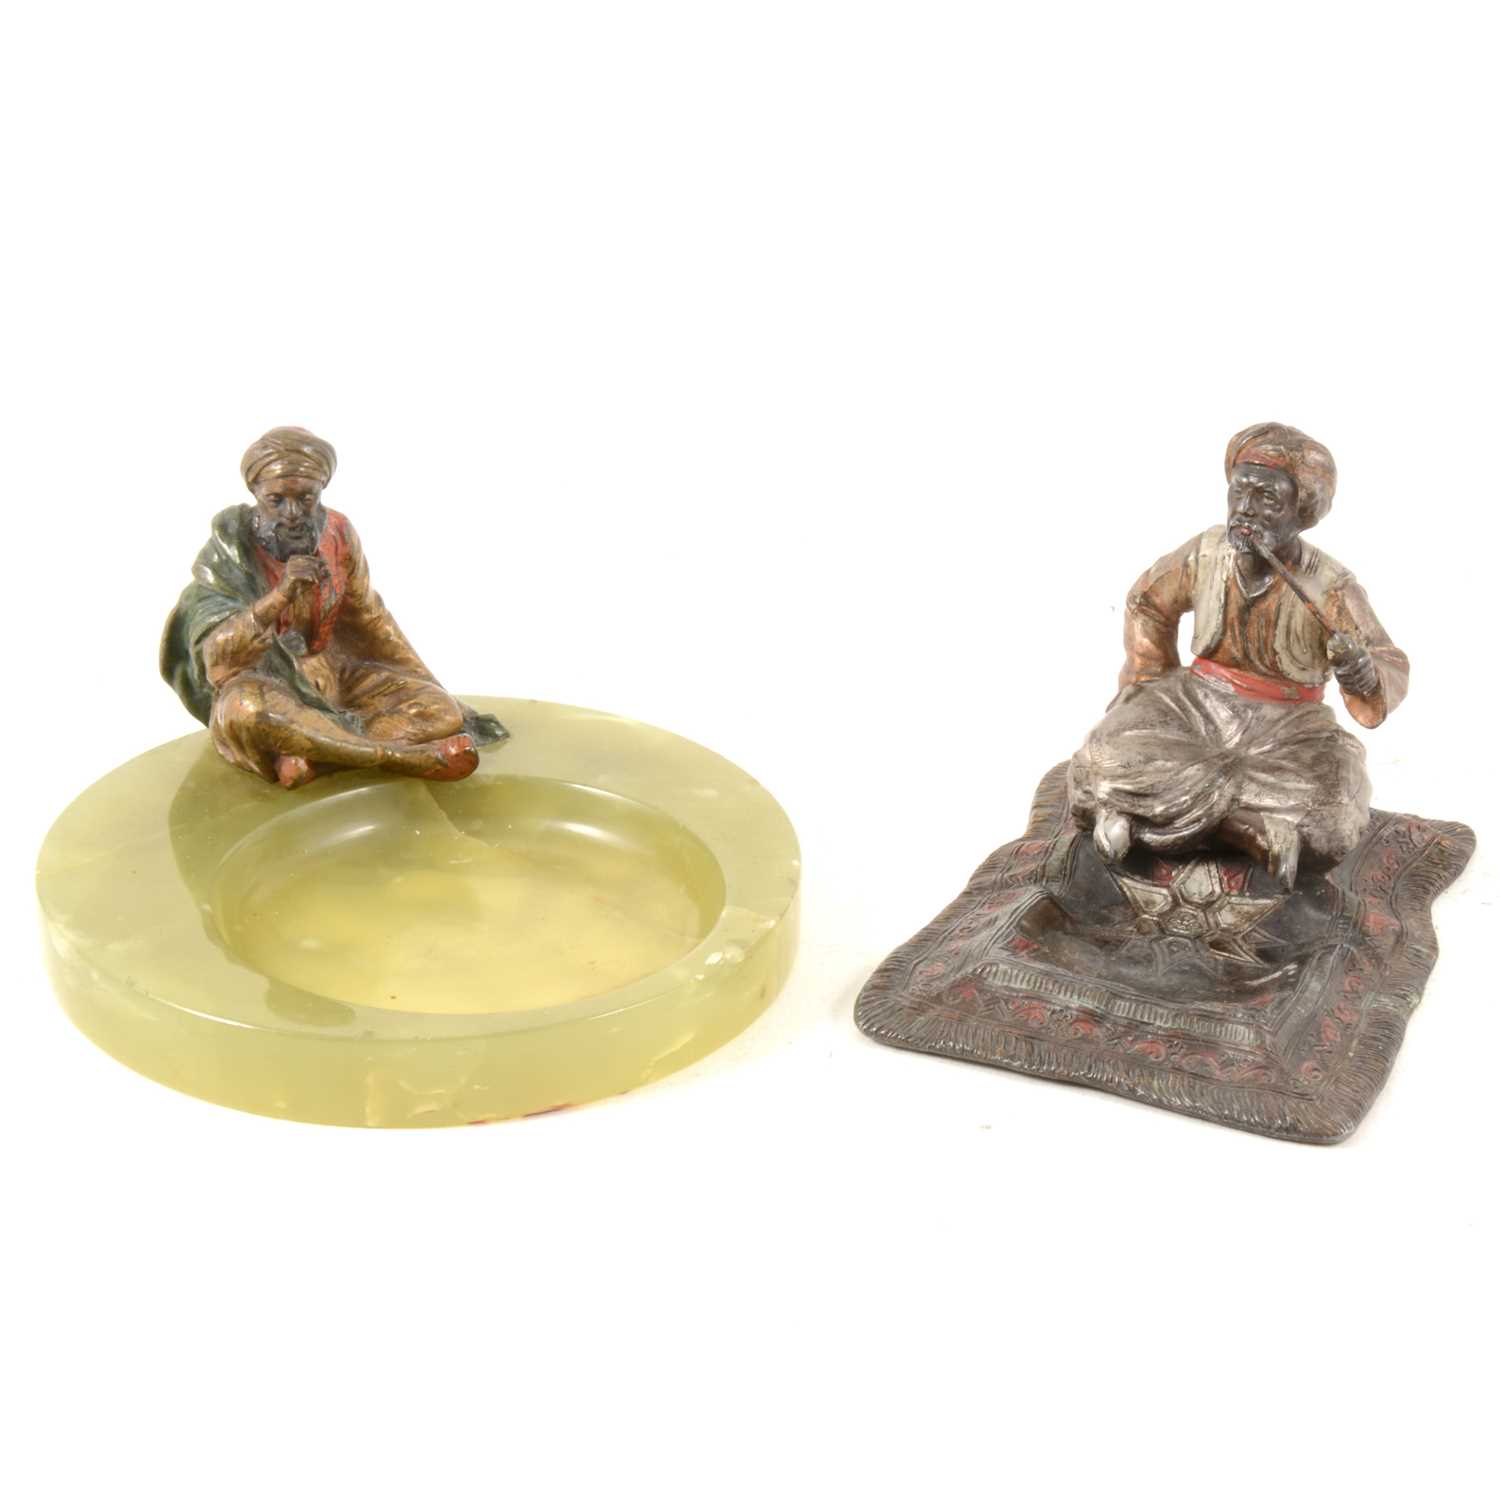 Lot 145 - A Bergman style cold painted bronze seated figure on green marble ashtray and lead based ashtray.